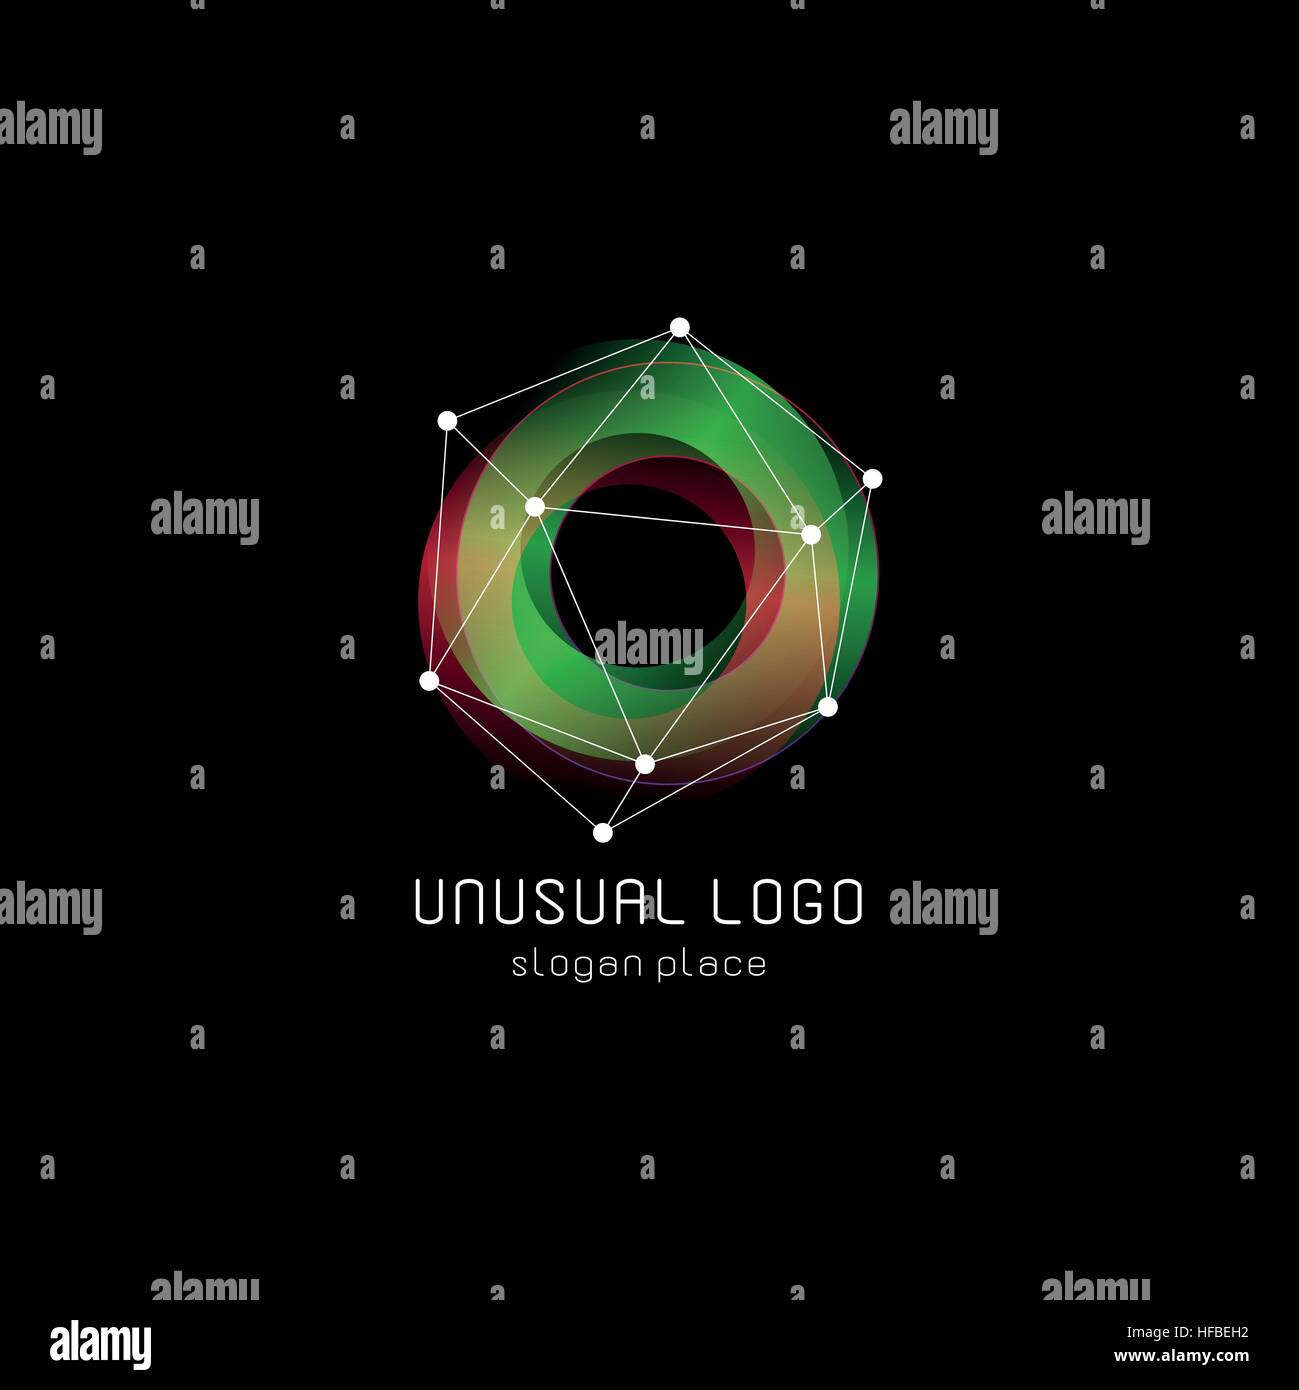 Unusual abstract geometric shapes vector logo. Circular, polygonal colorful logotypes on the black background. Stock Vector